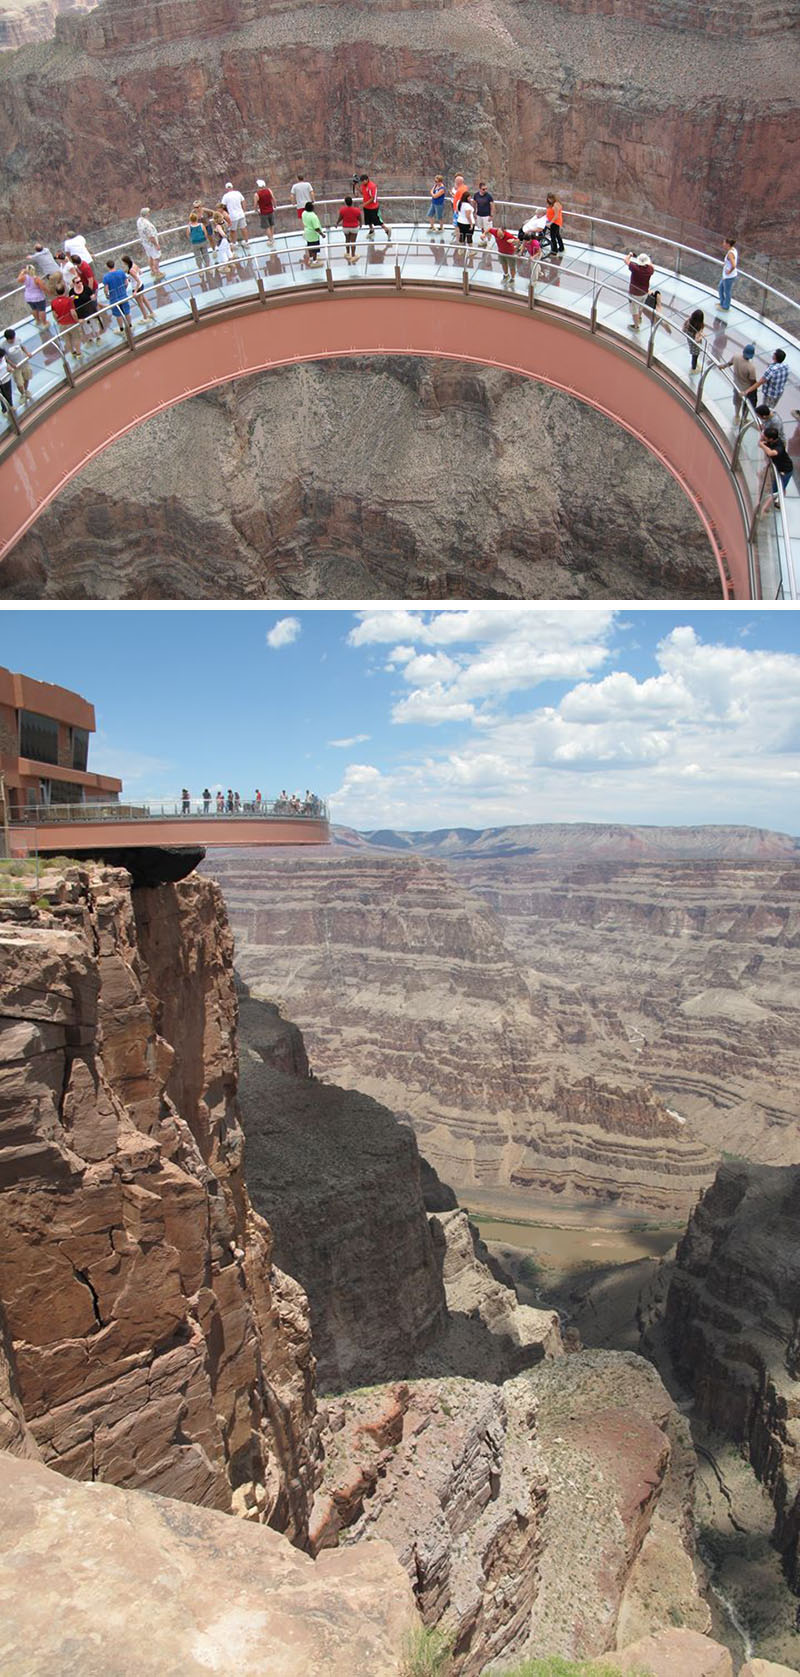 17 Tourist Activities That Would Be A Nightmare For People With A Fear Of Heights 2